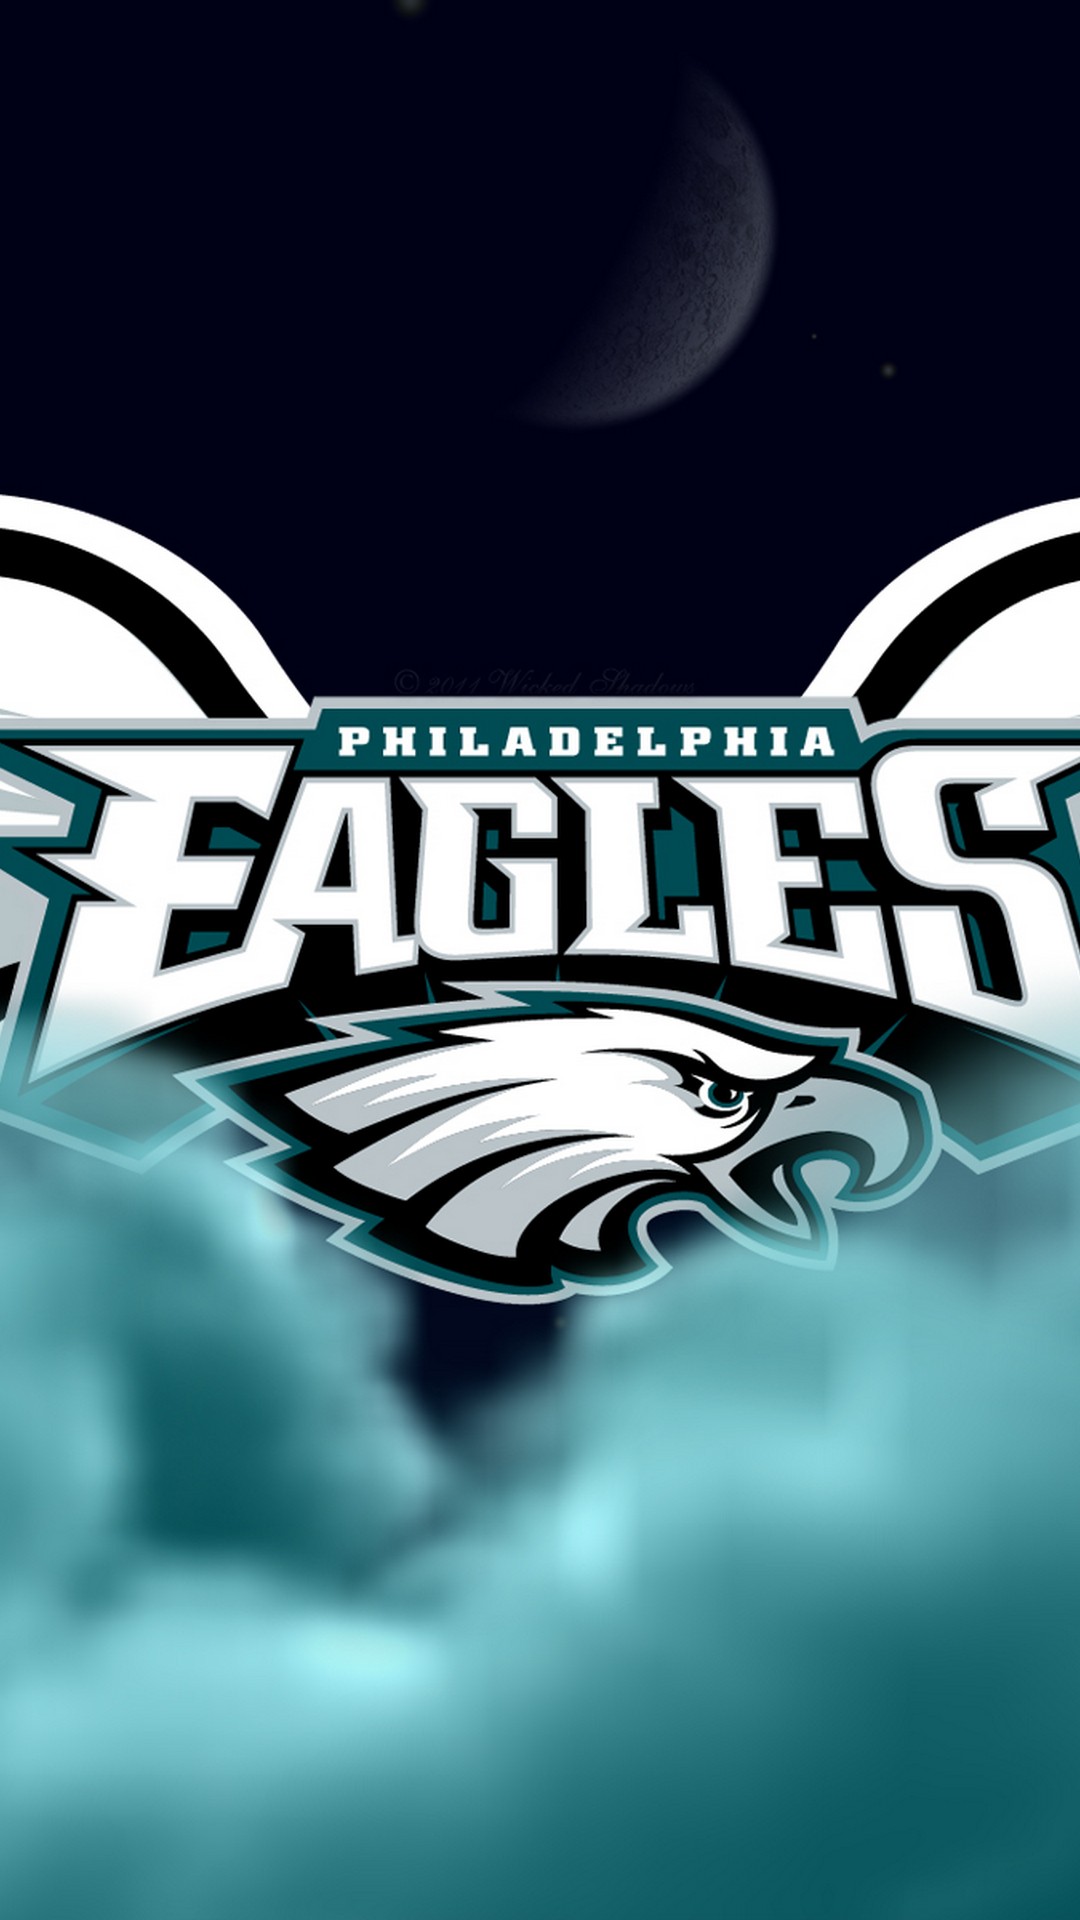 Philadelphia Eagles Iphone X Wallpaper With Resolution - Iphone X Football Backgrounds - HD Wallpaper 